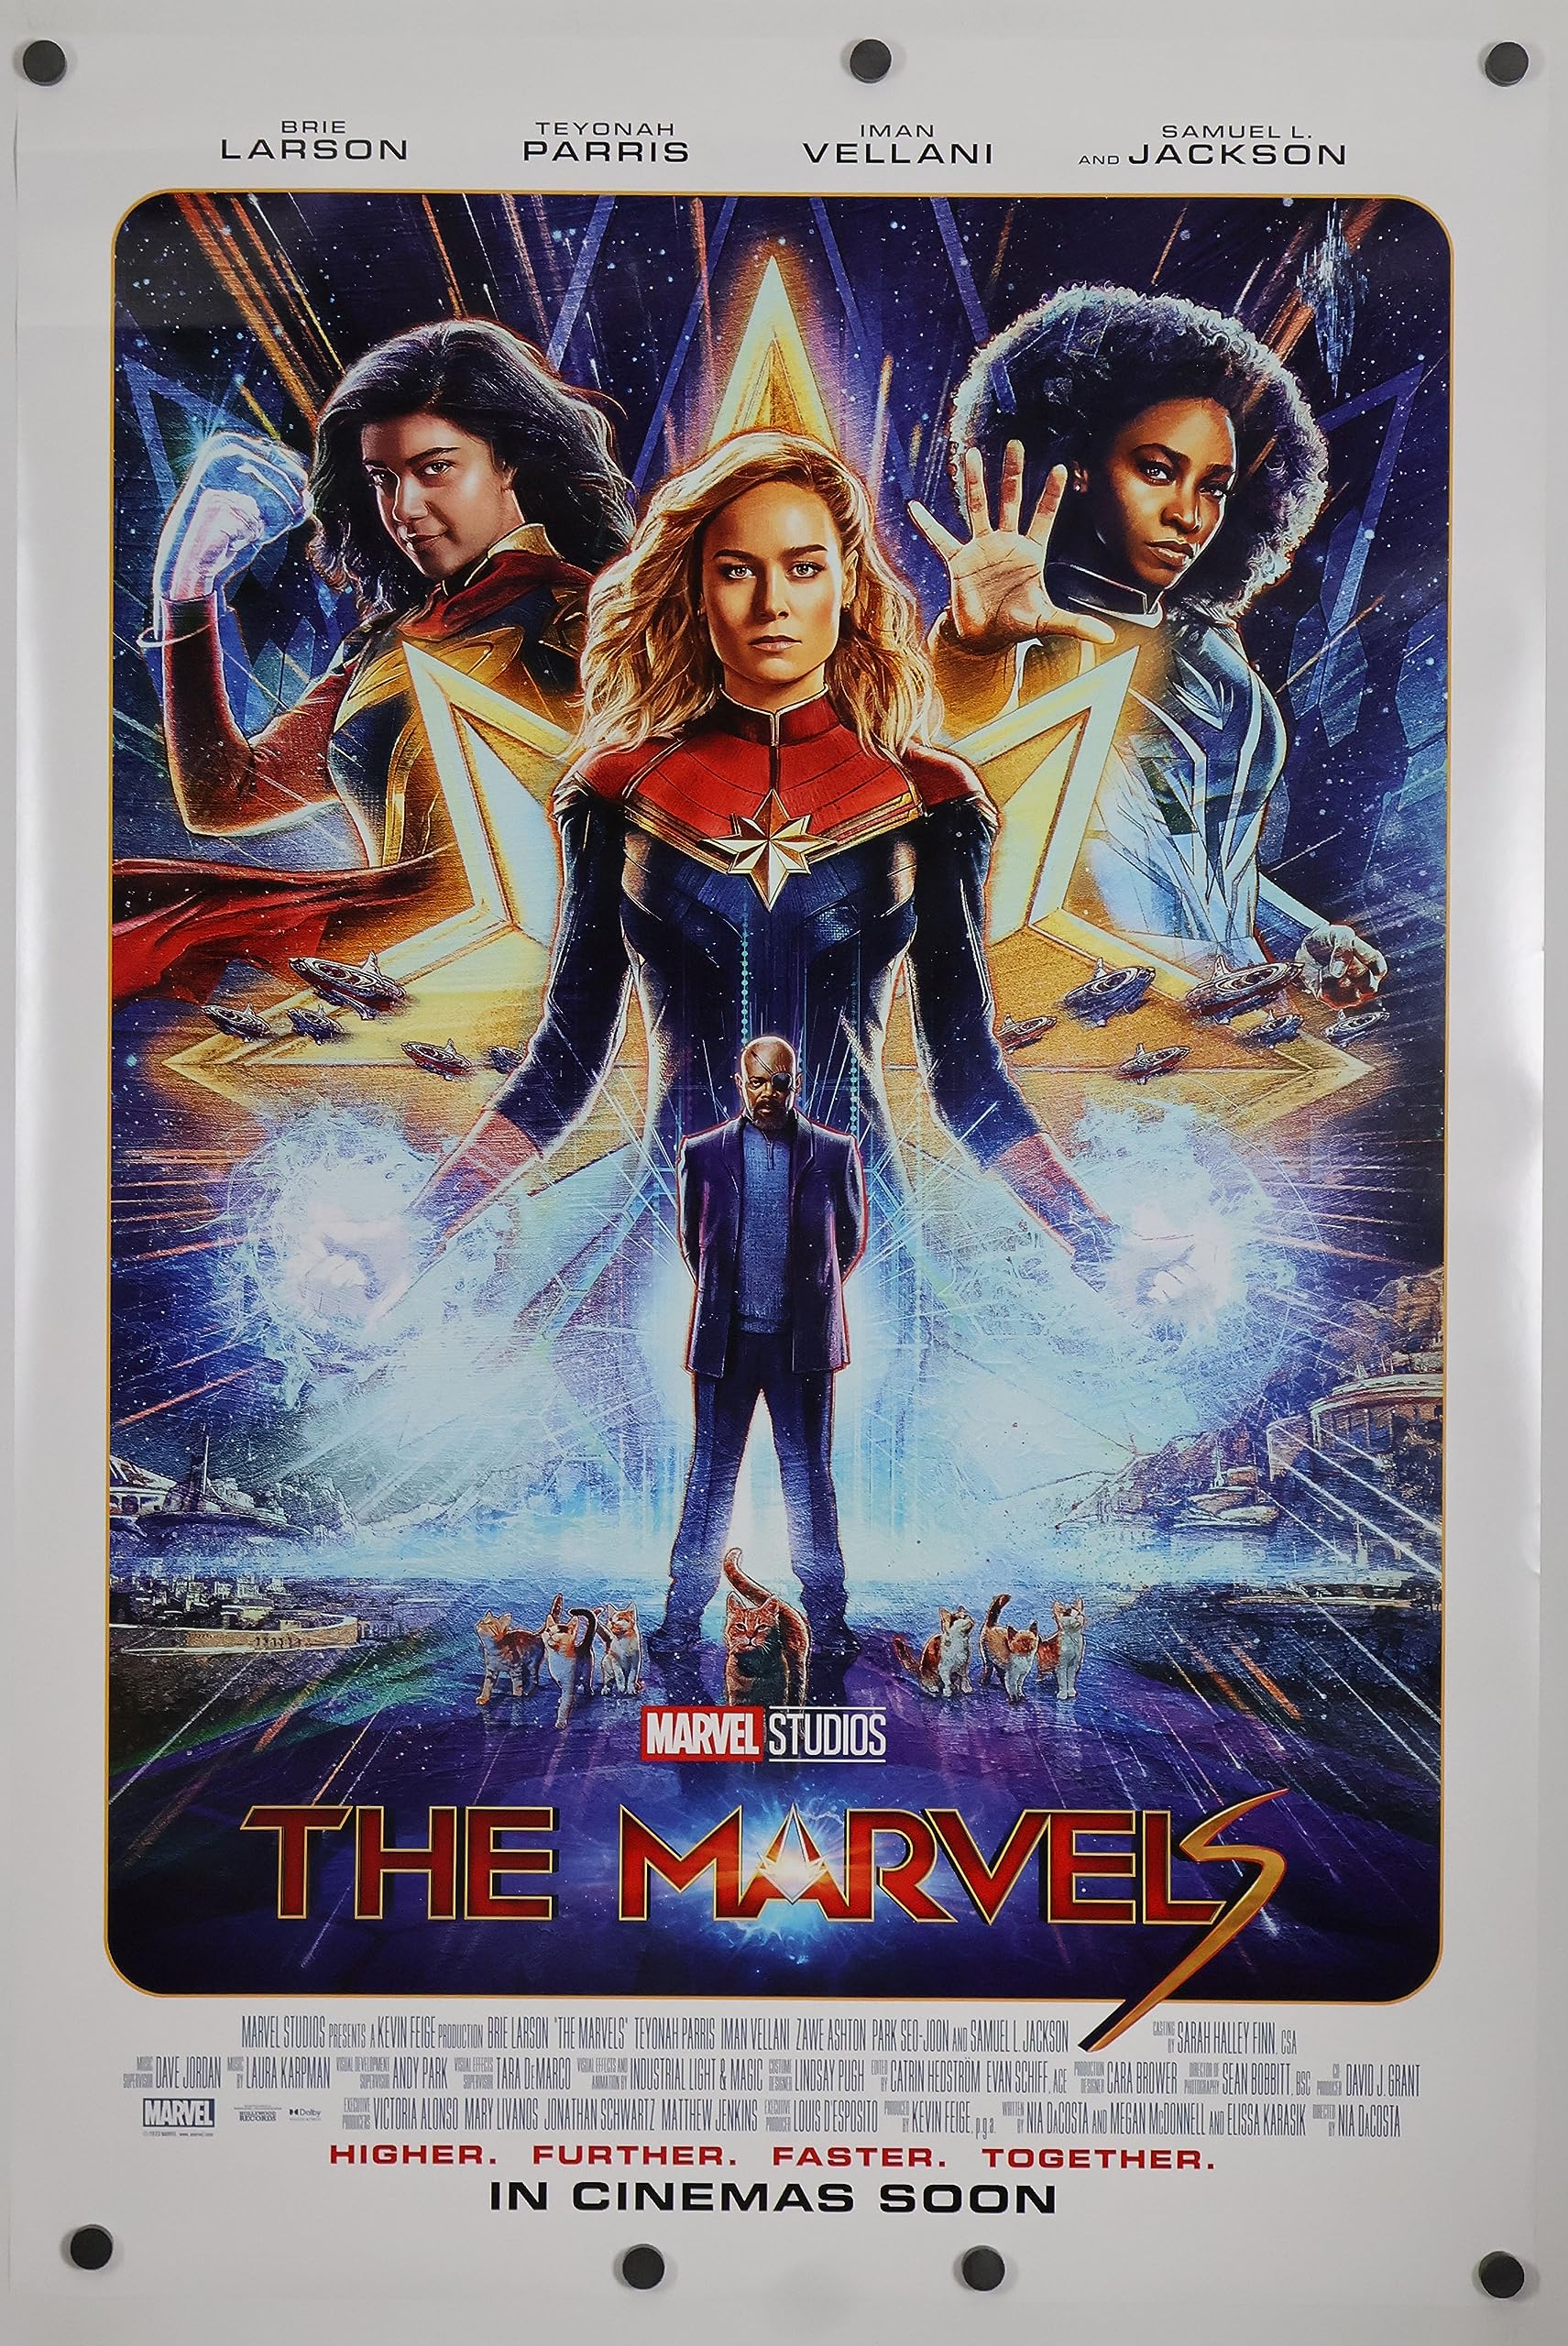 Be honest, how excited are you guys for The Marvels? (Poster by me